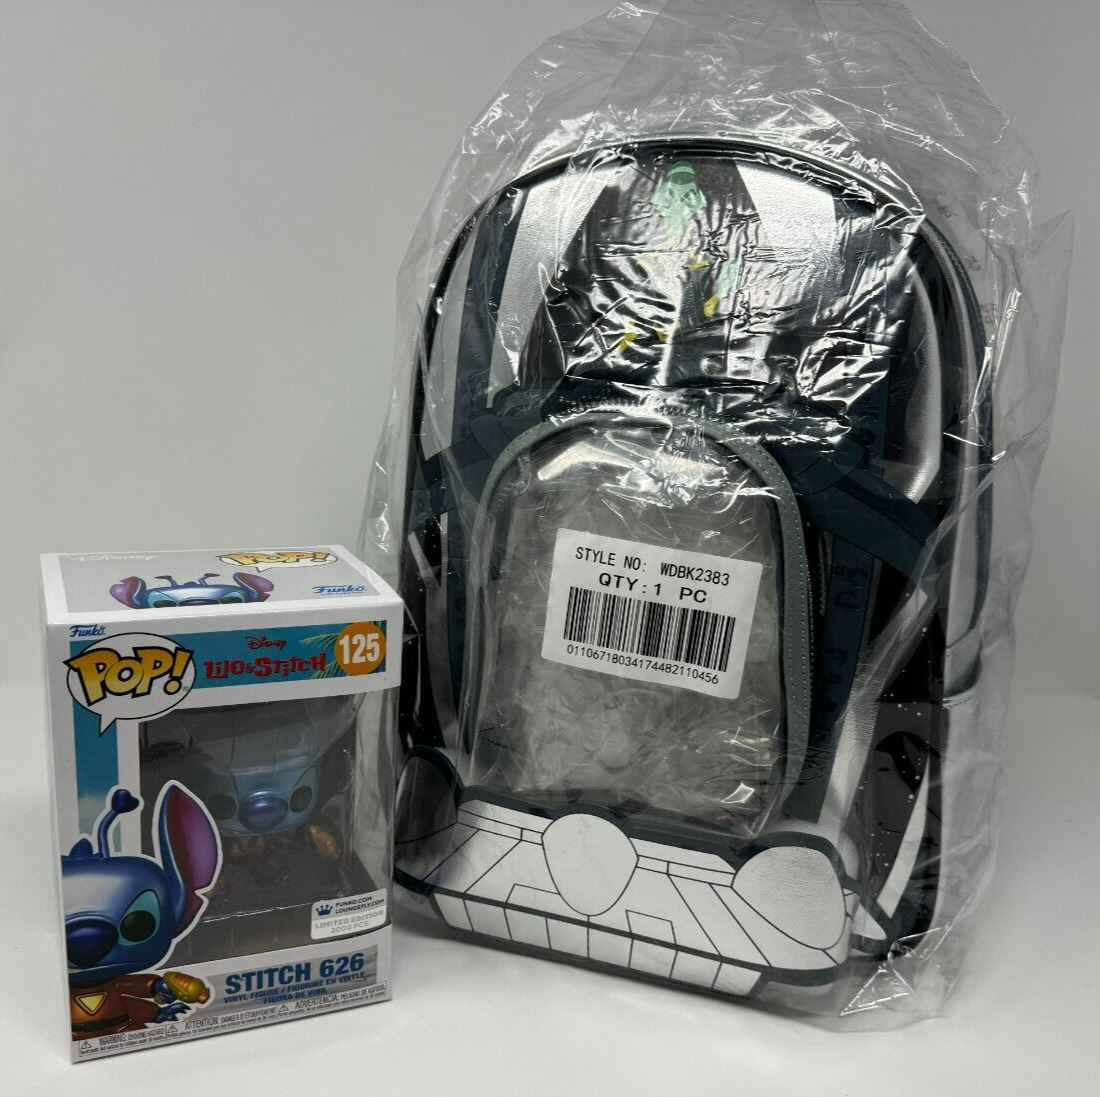 Loungefly Stitch Experiment 626 Metallic Funko Pop Backpack Bundle - NEW IN-HAND